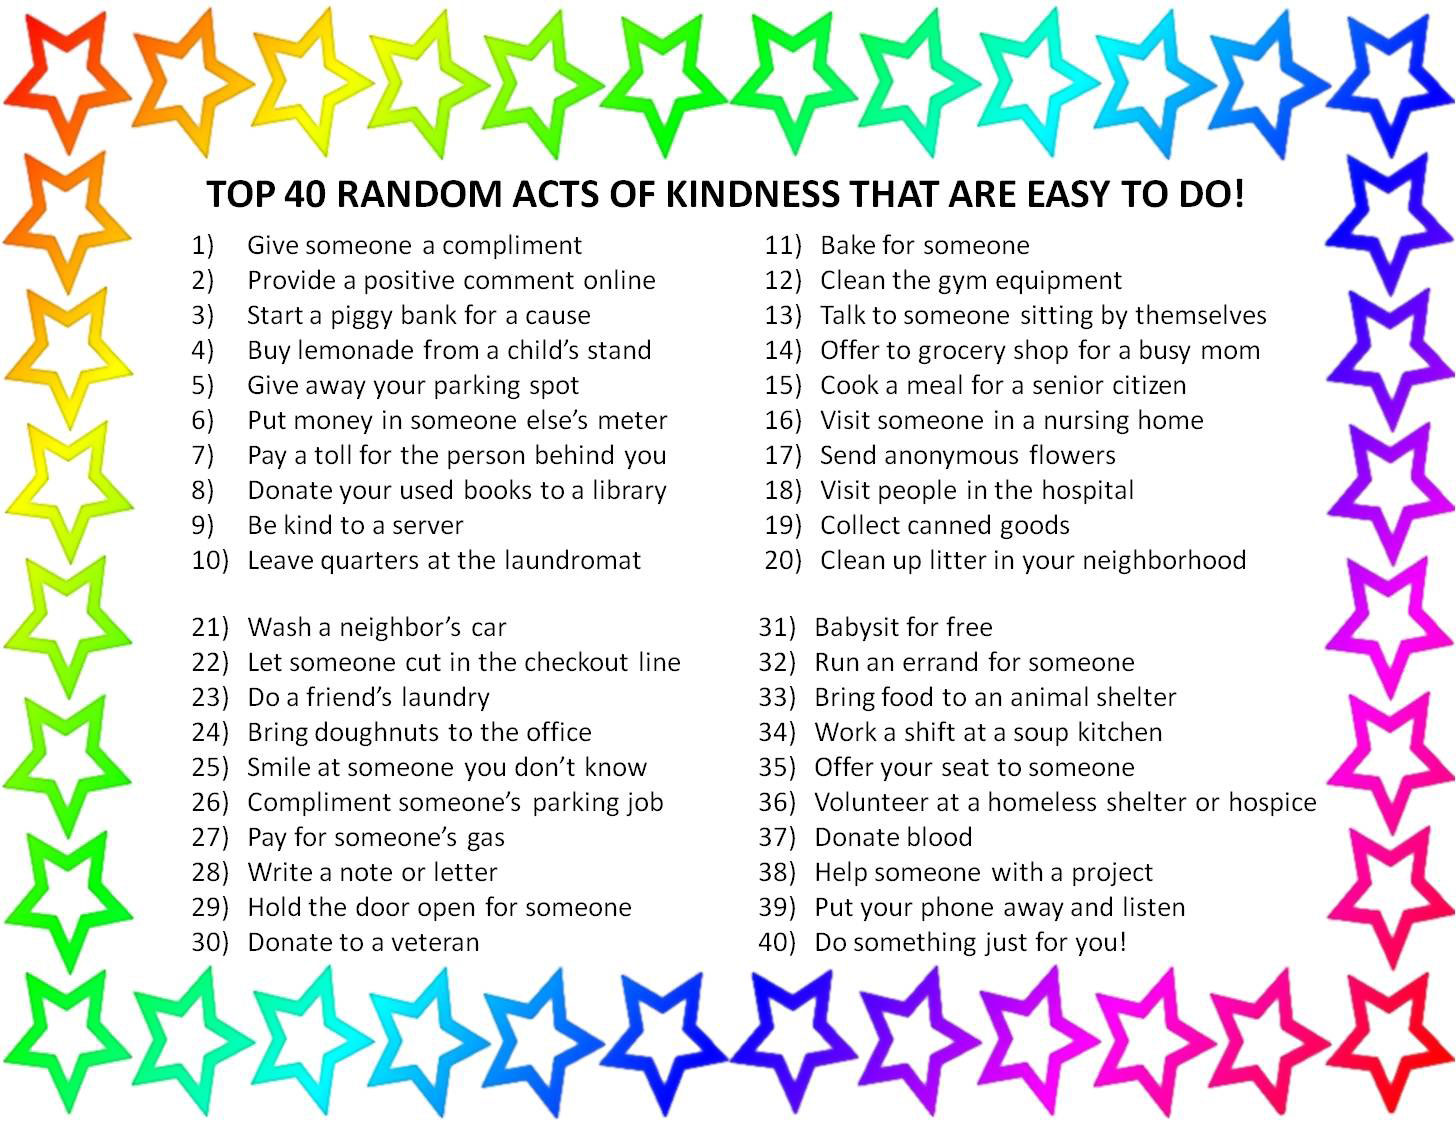 Top 40 Random Acts of Kindness Ideas